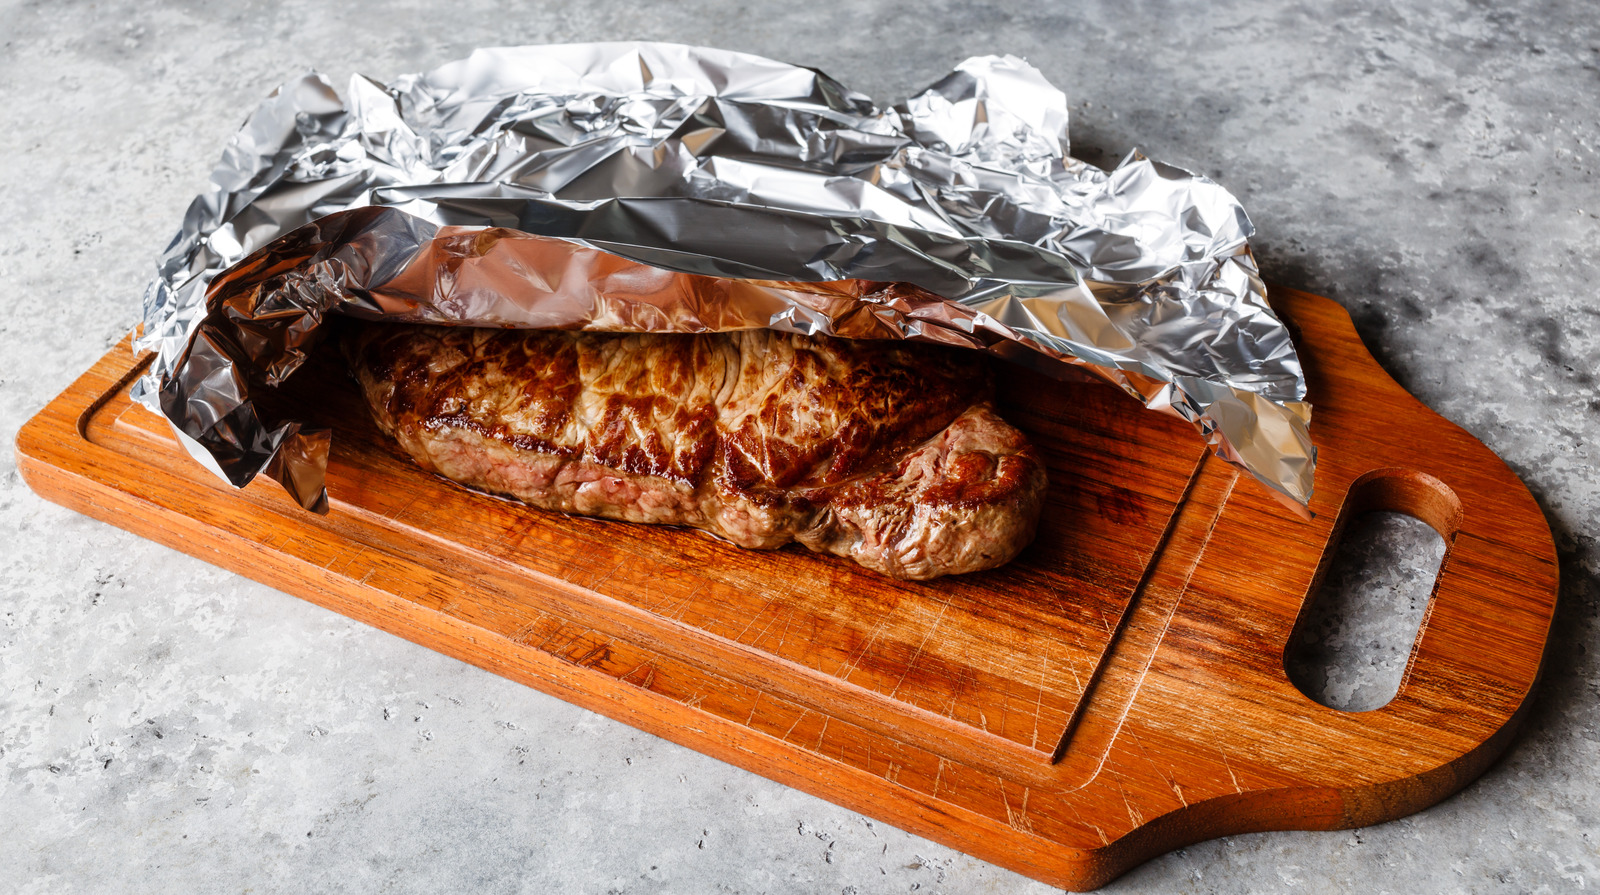 https://www.thedailymeal.com/img/gallery/why-you-might-want-to-think-twice-before-resting-meat-under-foil/l-intro-1692765682.jpg